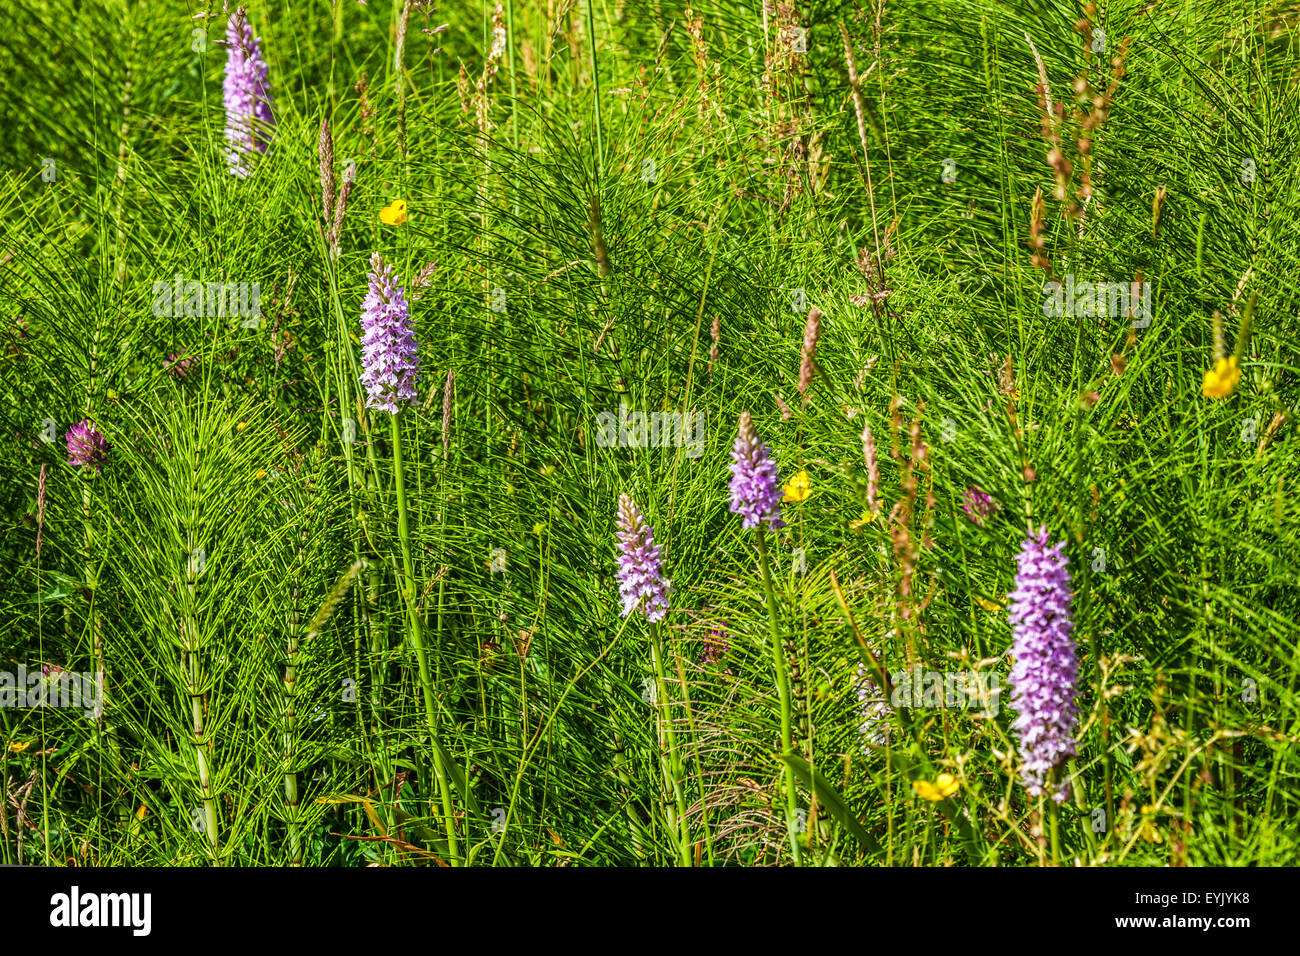 Common Spotted Orchids, Dactylorhiza fuchsii, in a meadow. Stock Photo